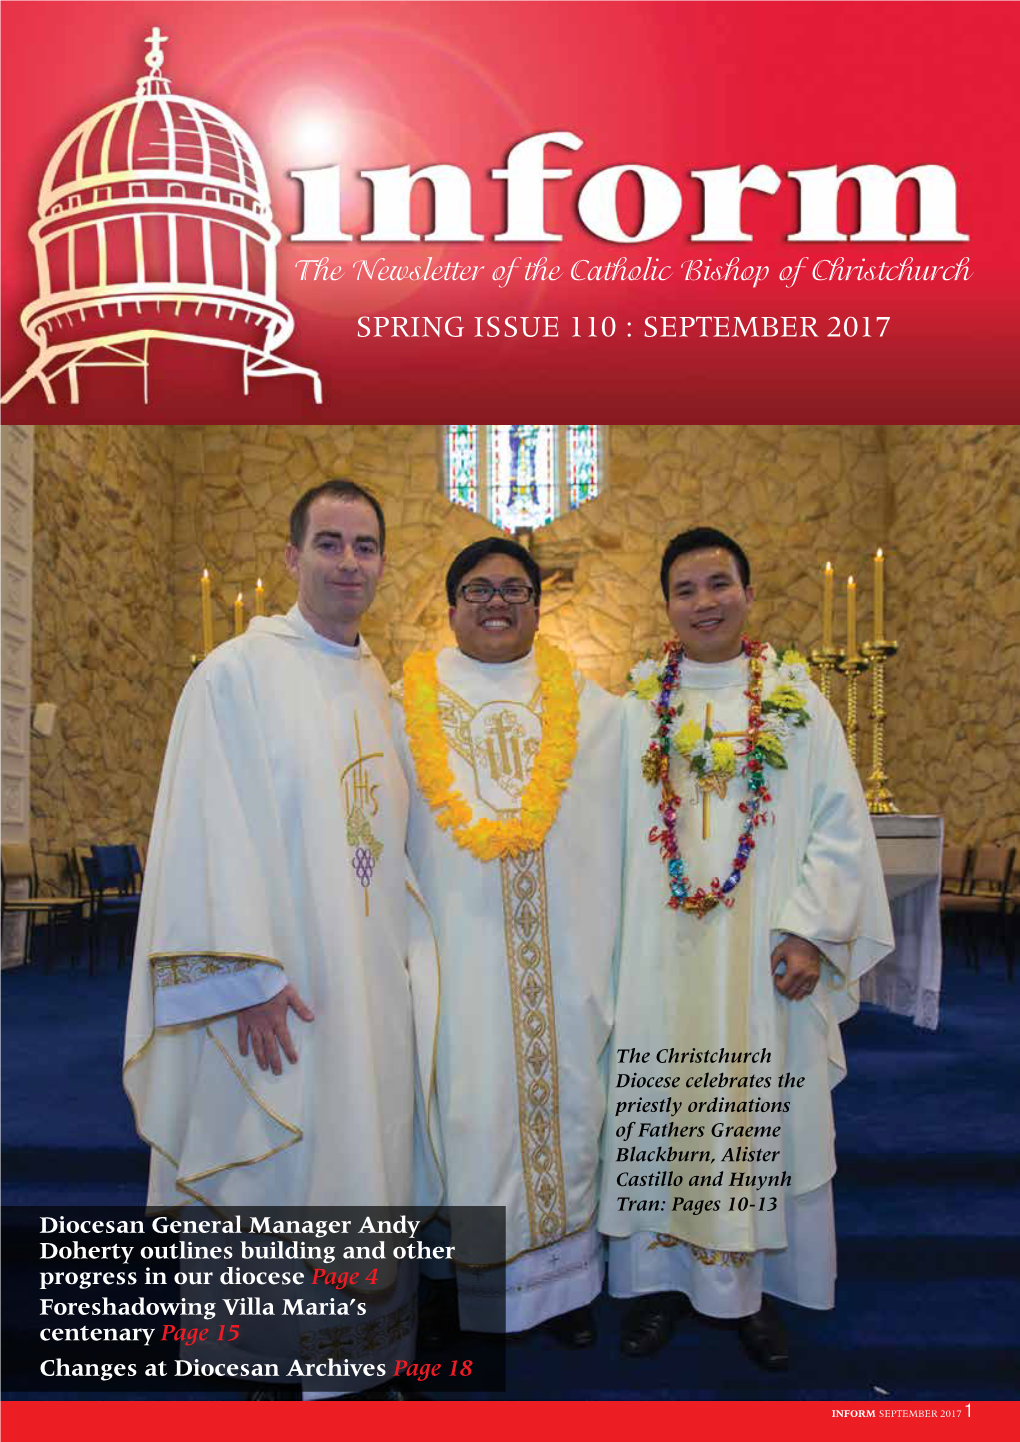 The Newsletter of the Catholic Bishop of Christchurch SPRING ISSUE 110 : SEPTEMBER 2017